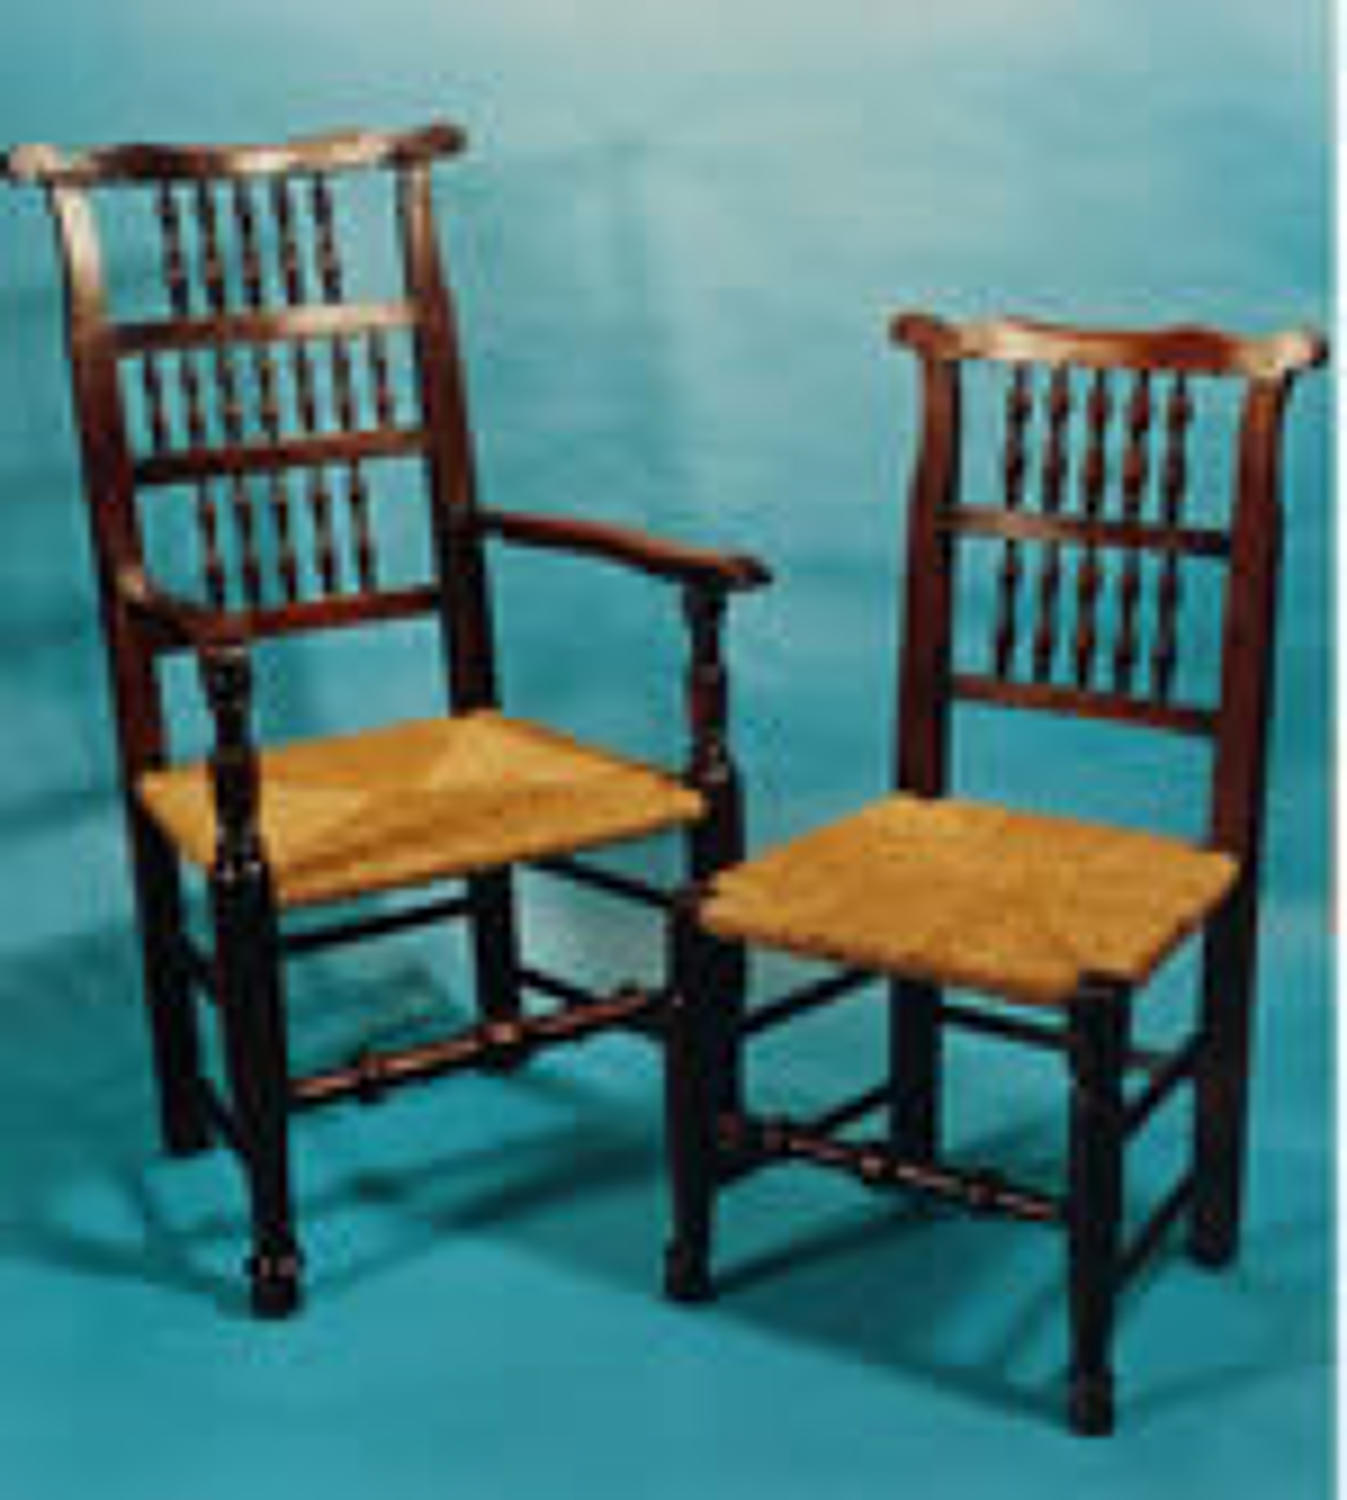 Harlequin Set of 18thc Ash Spindle Back Chairs. English C1770 - 80